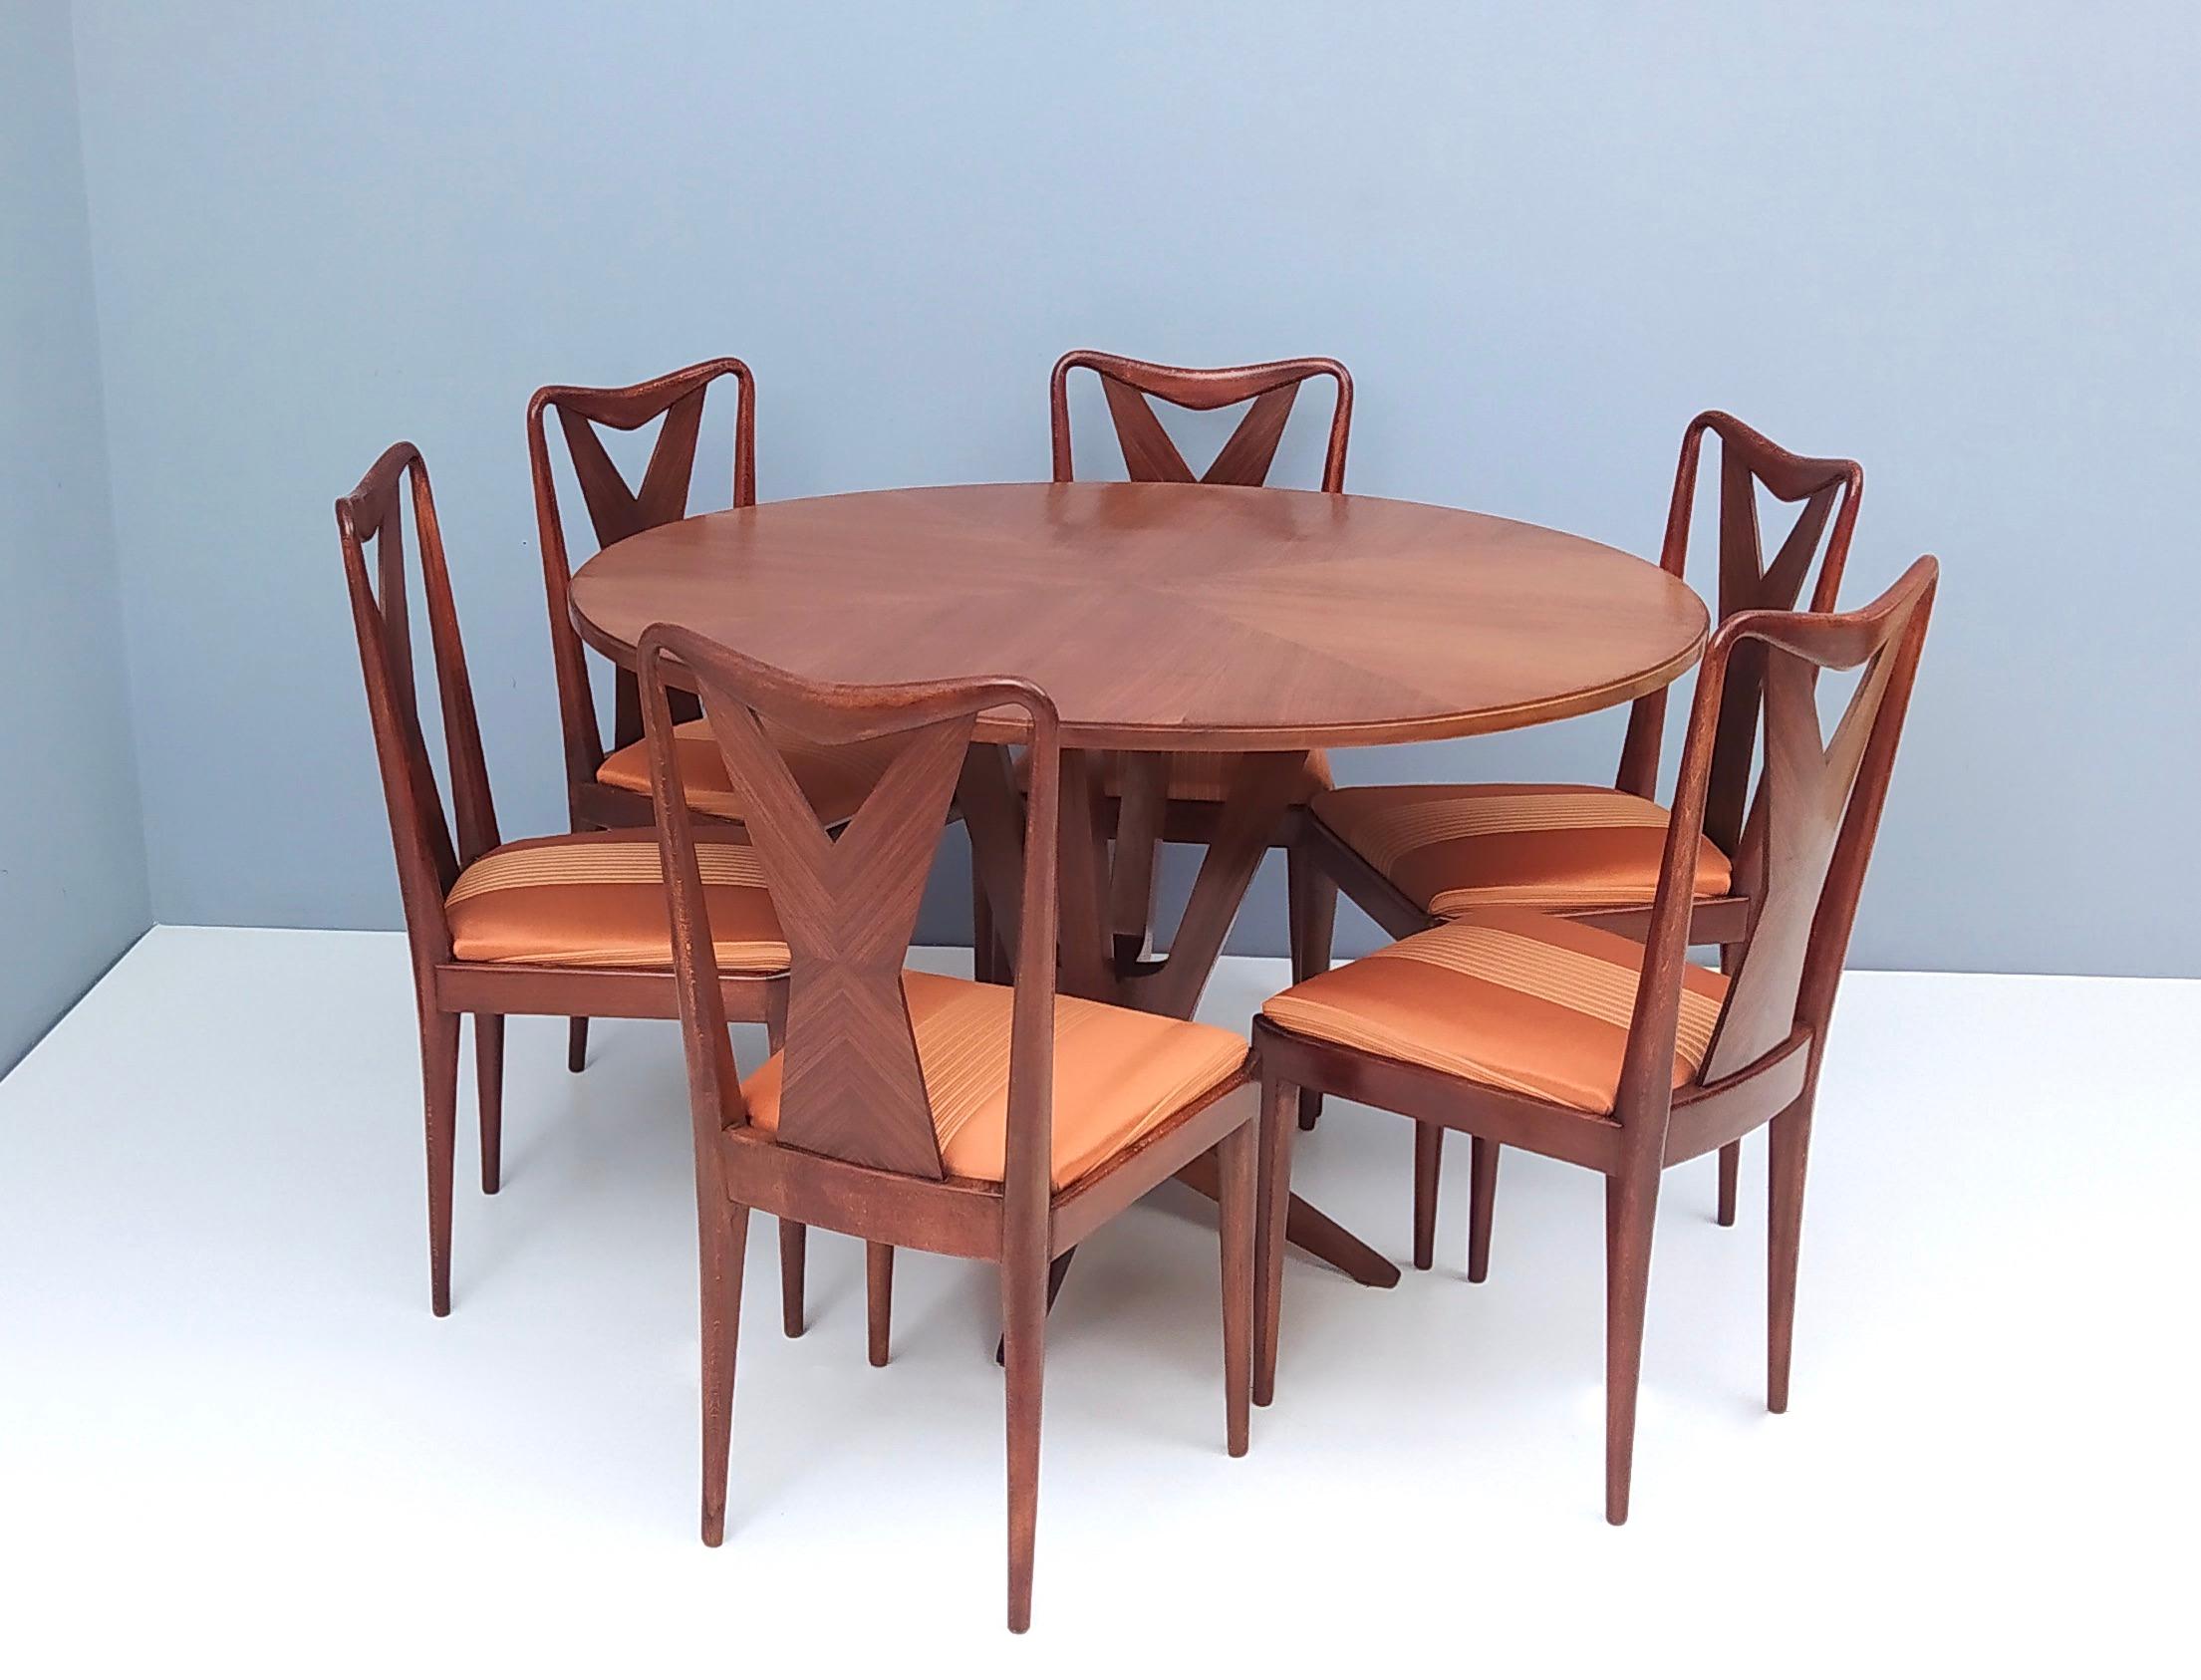 Made in Italy, 1950s.
Their design is ascribable to Ico Parisi, in particular the shape of the legs.
These dining chairs feature a walnut frame and a new orange satin upholstery.
They're vintage therefore they might show slight traces of use, but